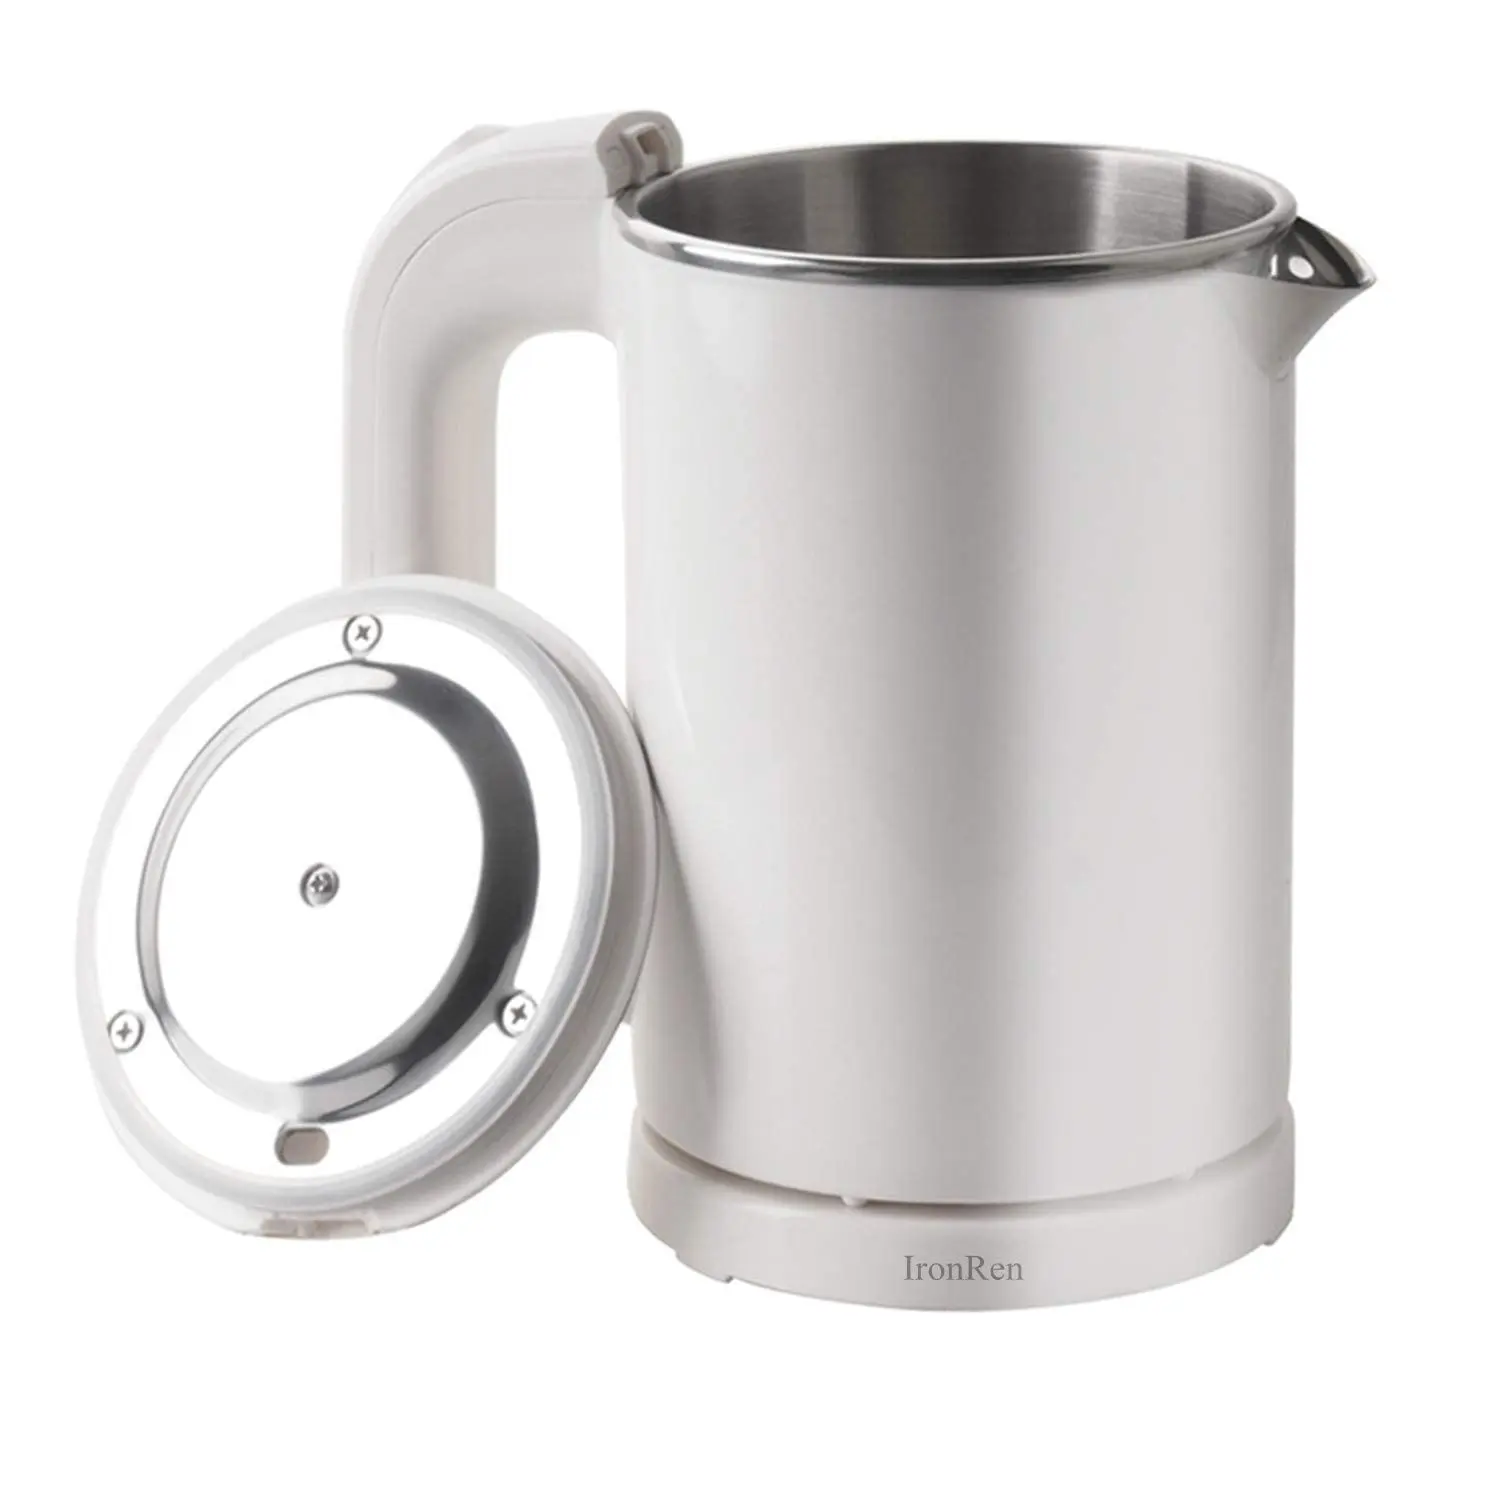 small electric jug kettle - Can a kettle be called a jug